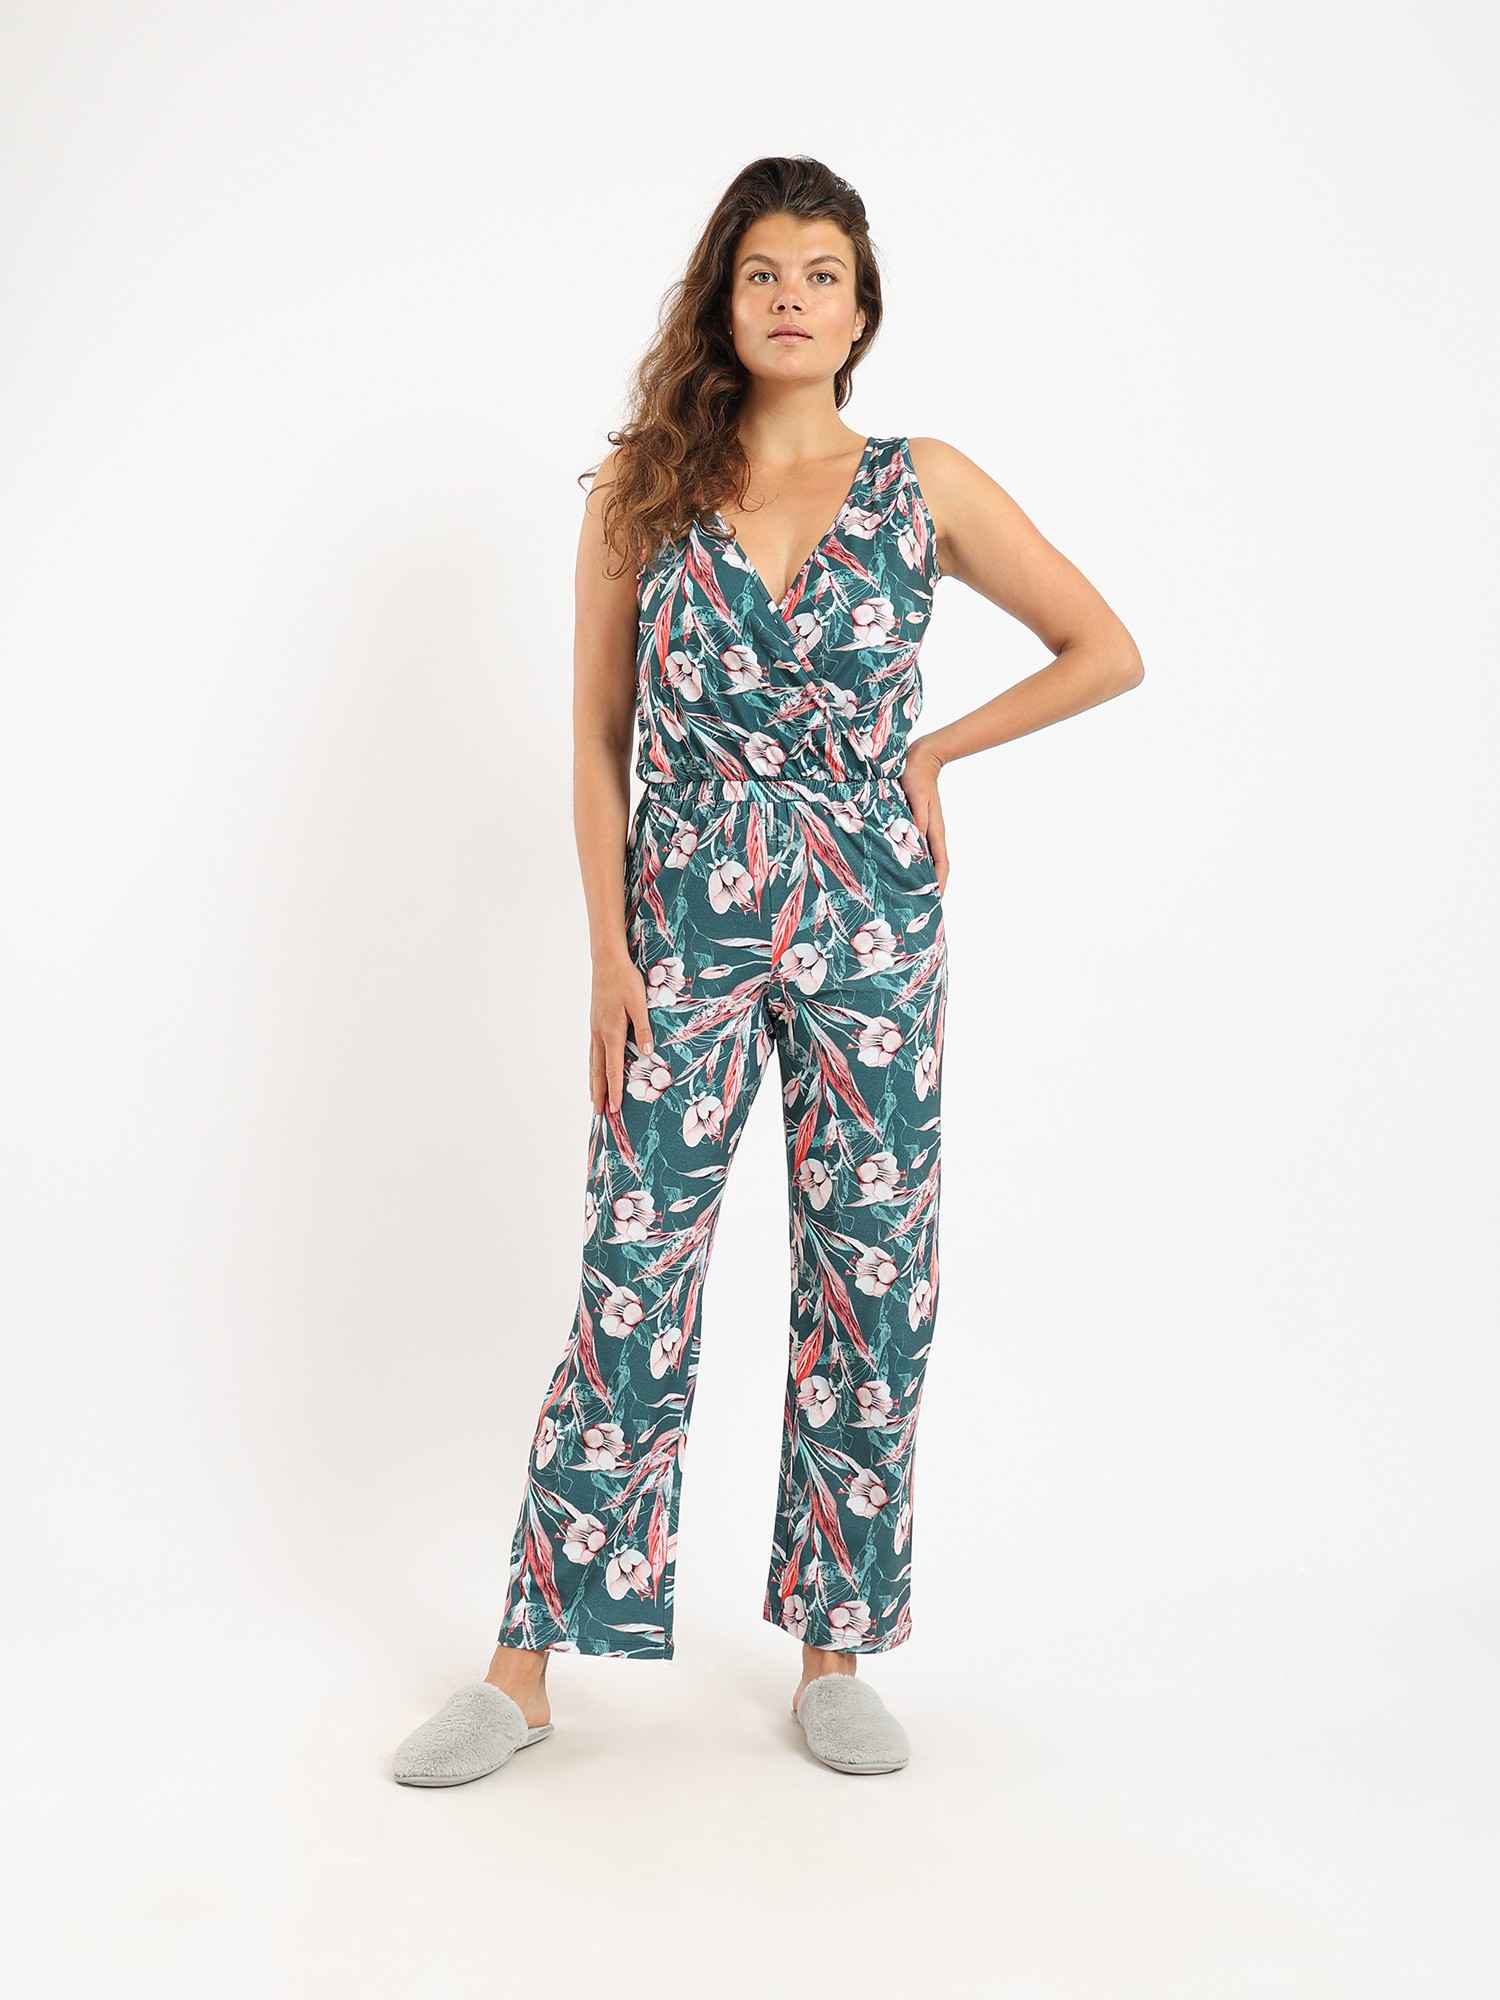 Women's Summer Jumpsuit From Redcotton